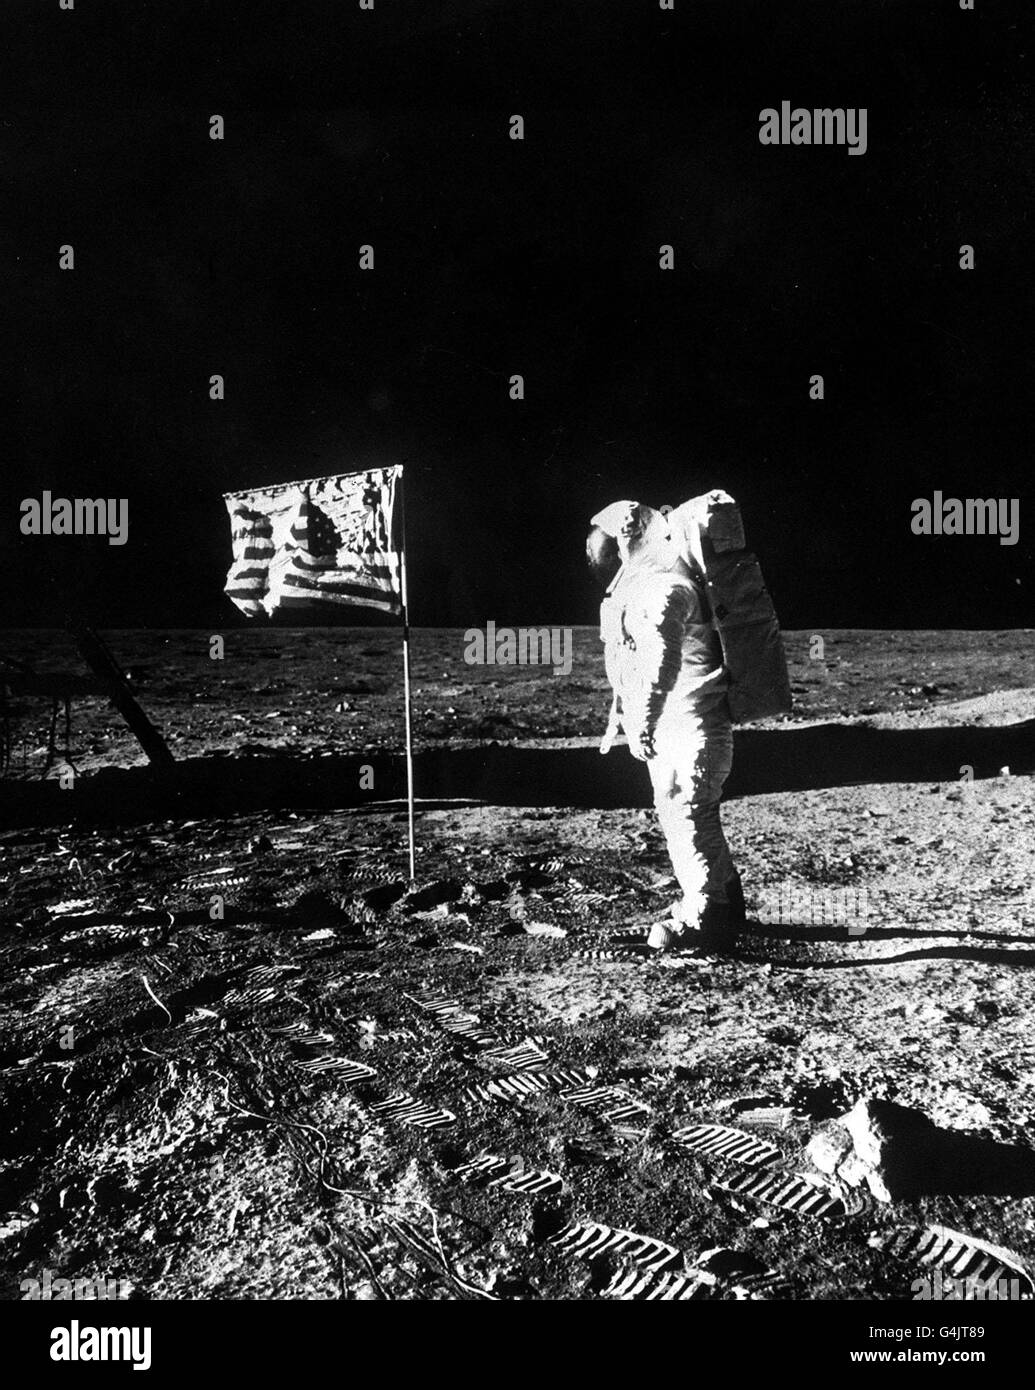 PA NEWS PHOTO 21/8/69 A LIBRARY FILE PICTURE OF ASTRONAUT EDWIN ALDRIN WITH THE FLAG OF THE UNITED STATES PLANTED IN THE SURFACE OF THE MOON ON THE APOLLO 11 FLIGHT TO THE MOON Stock Photo